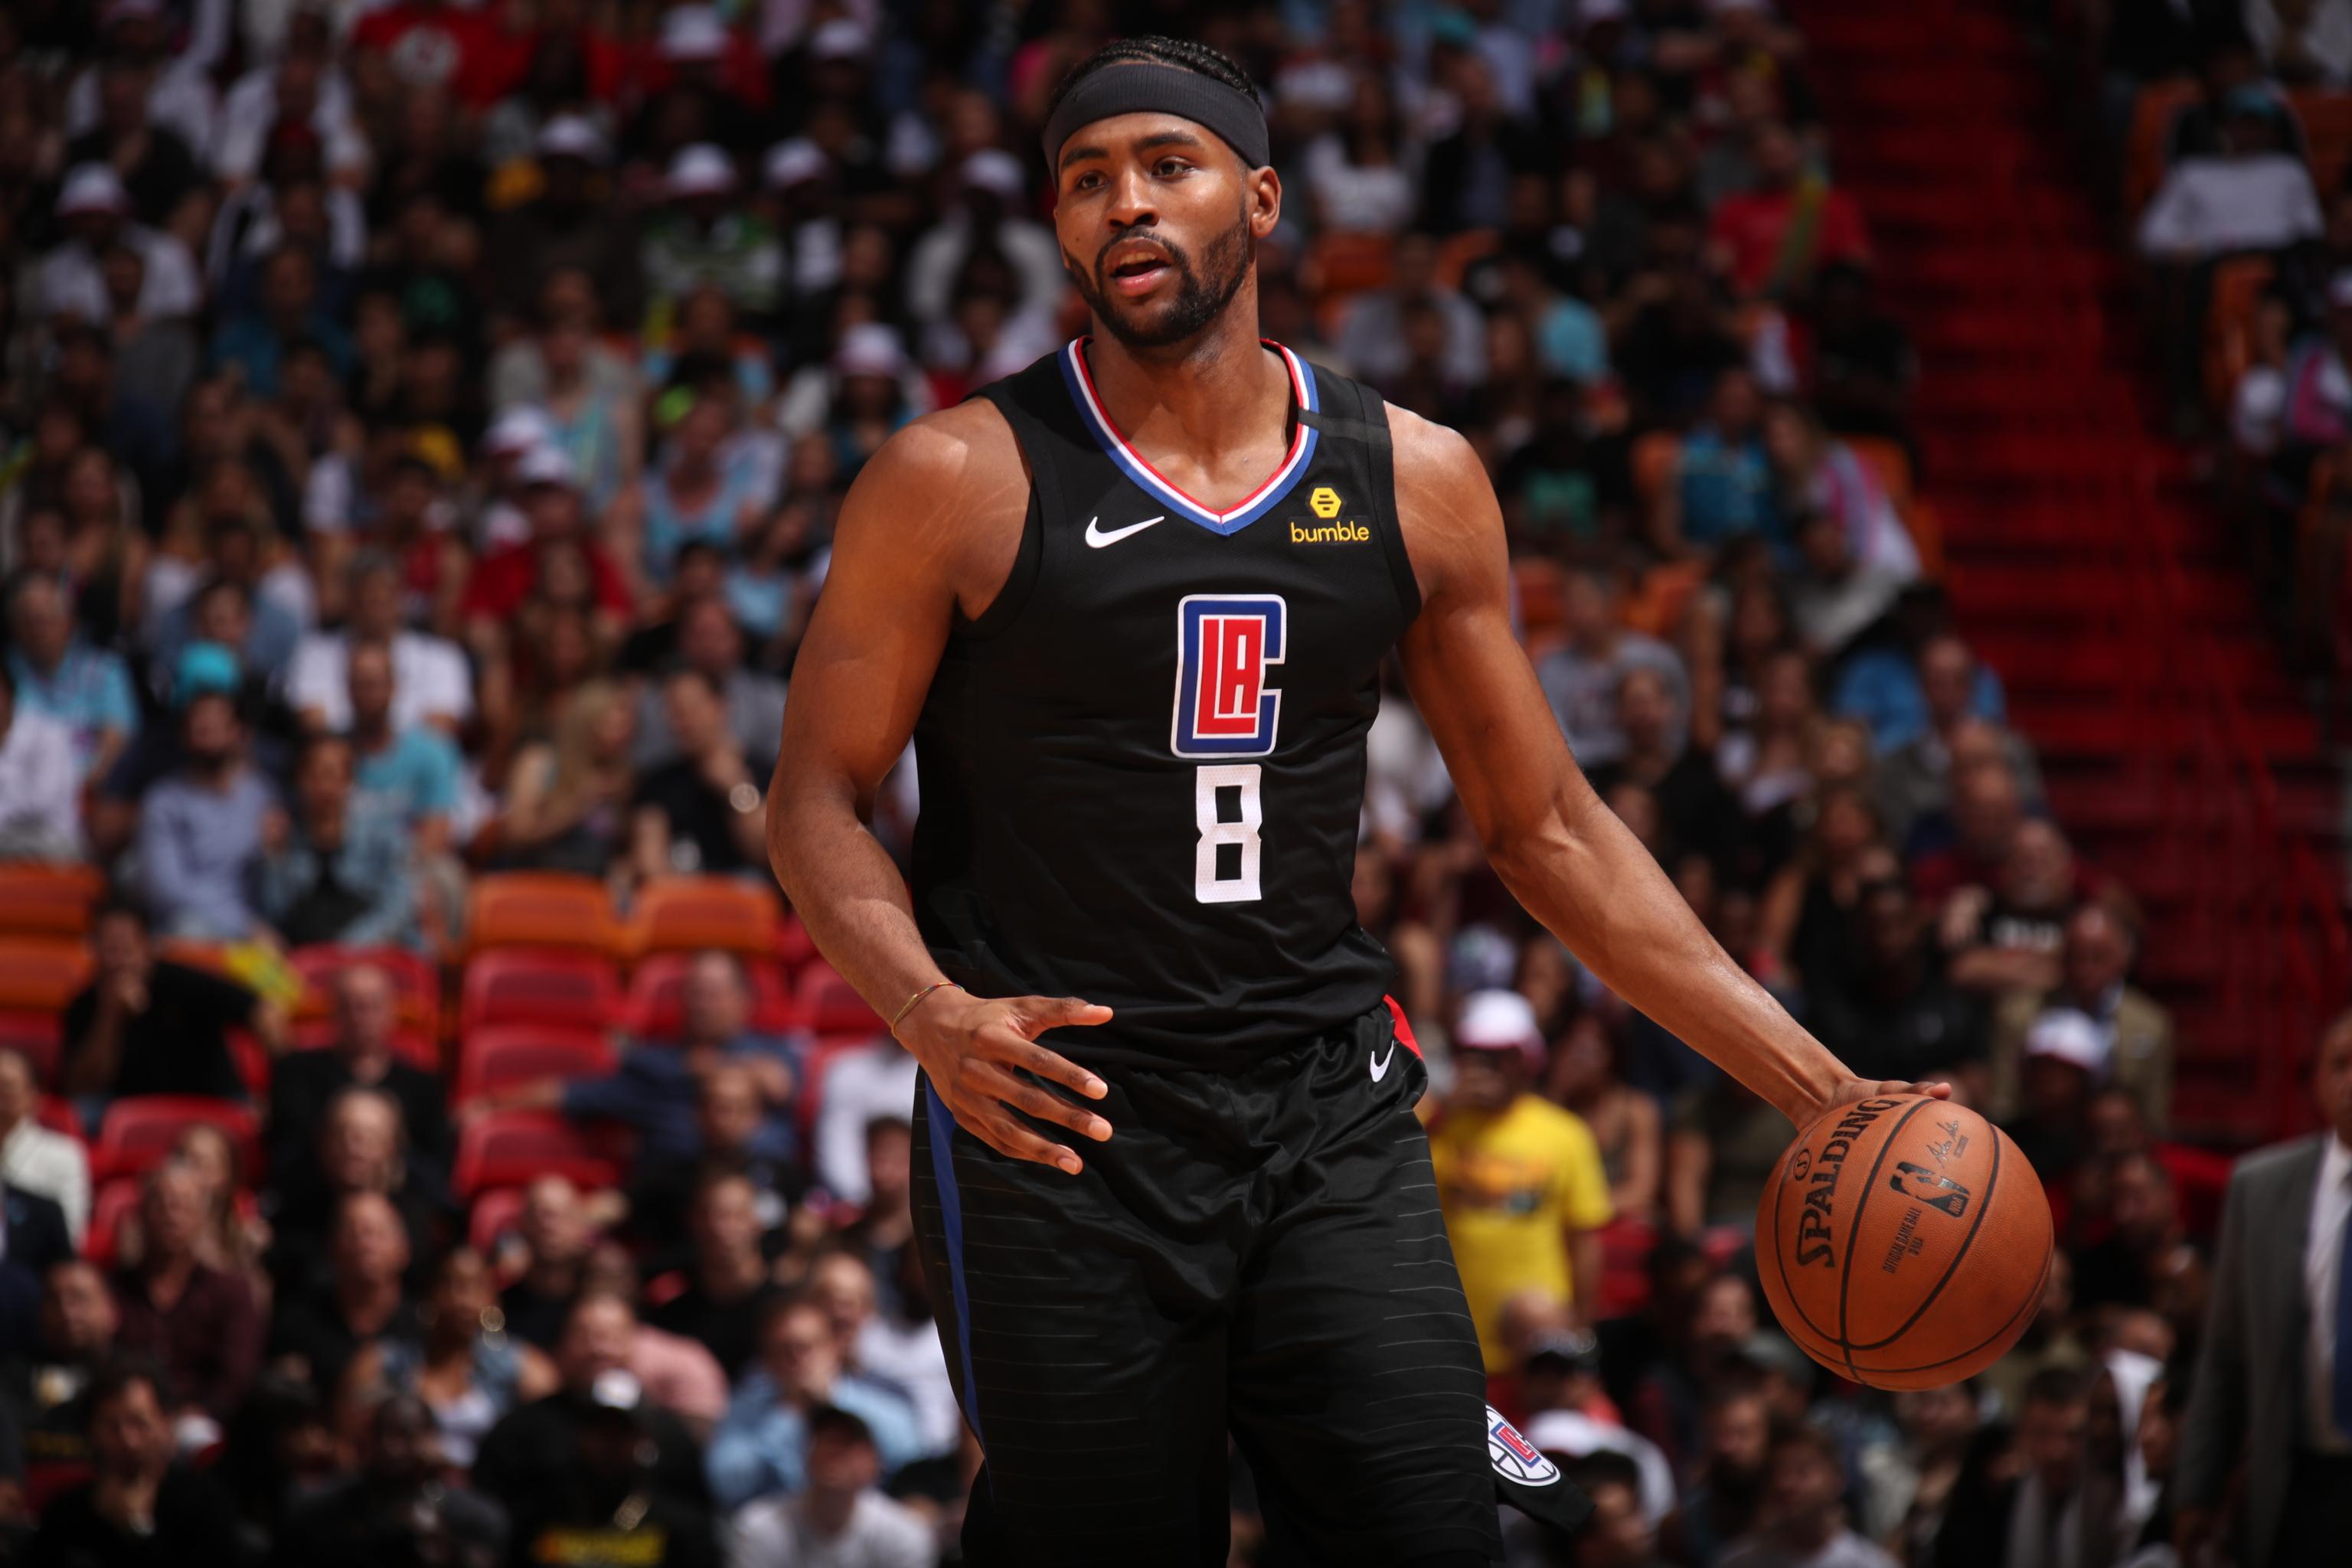 Clippers' Moe Harkless to Wear No. 11 Instead of No. 8 to Honor